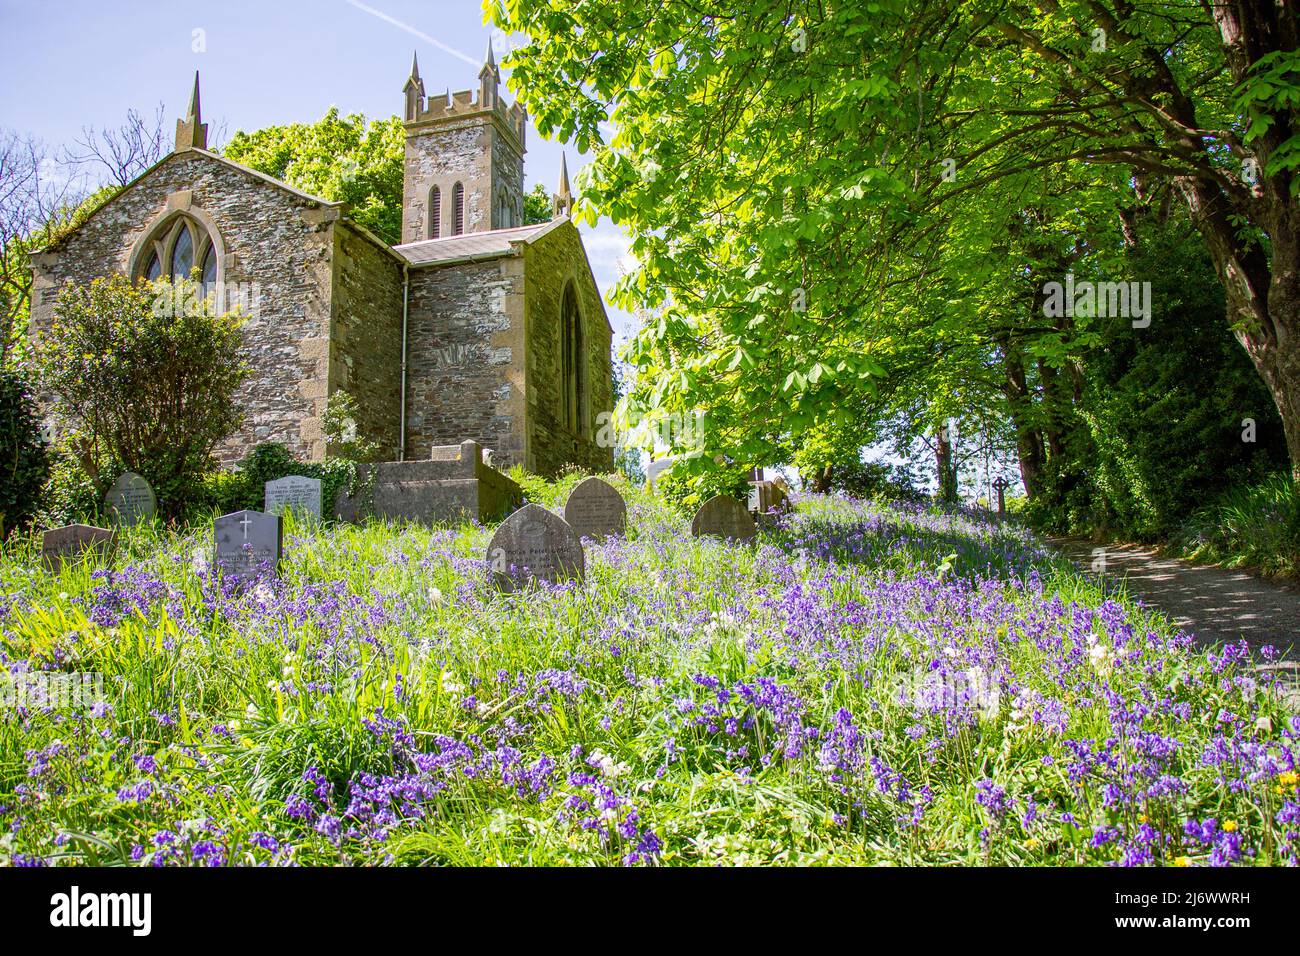 Bluebells Blue Bells growing in Churchyard or cemetery covering gravestones or headstones Stock Photo